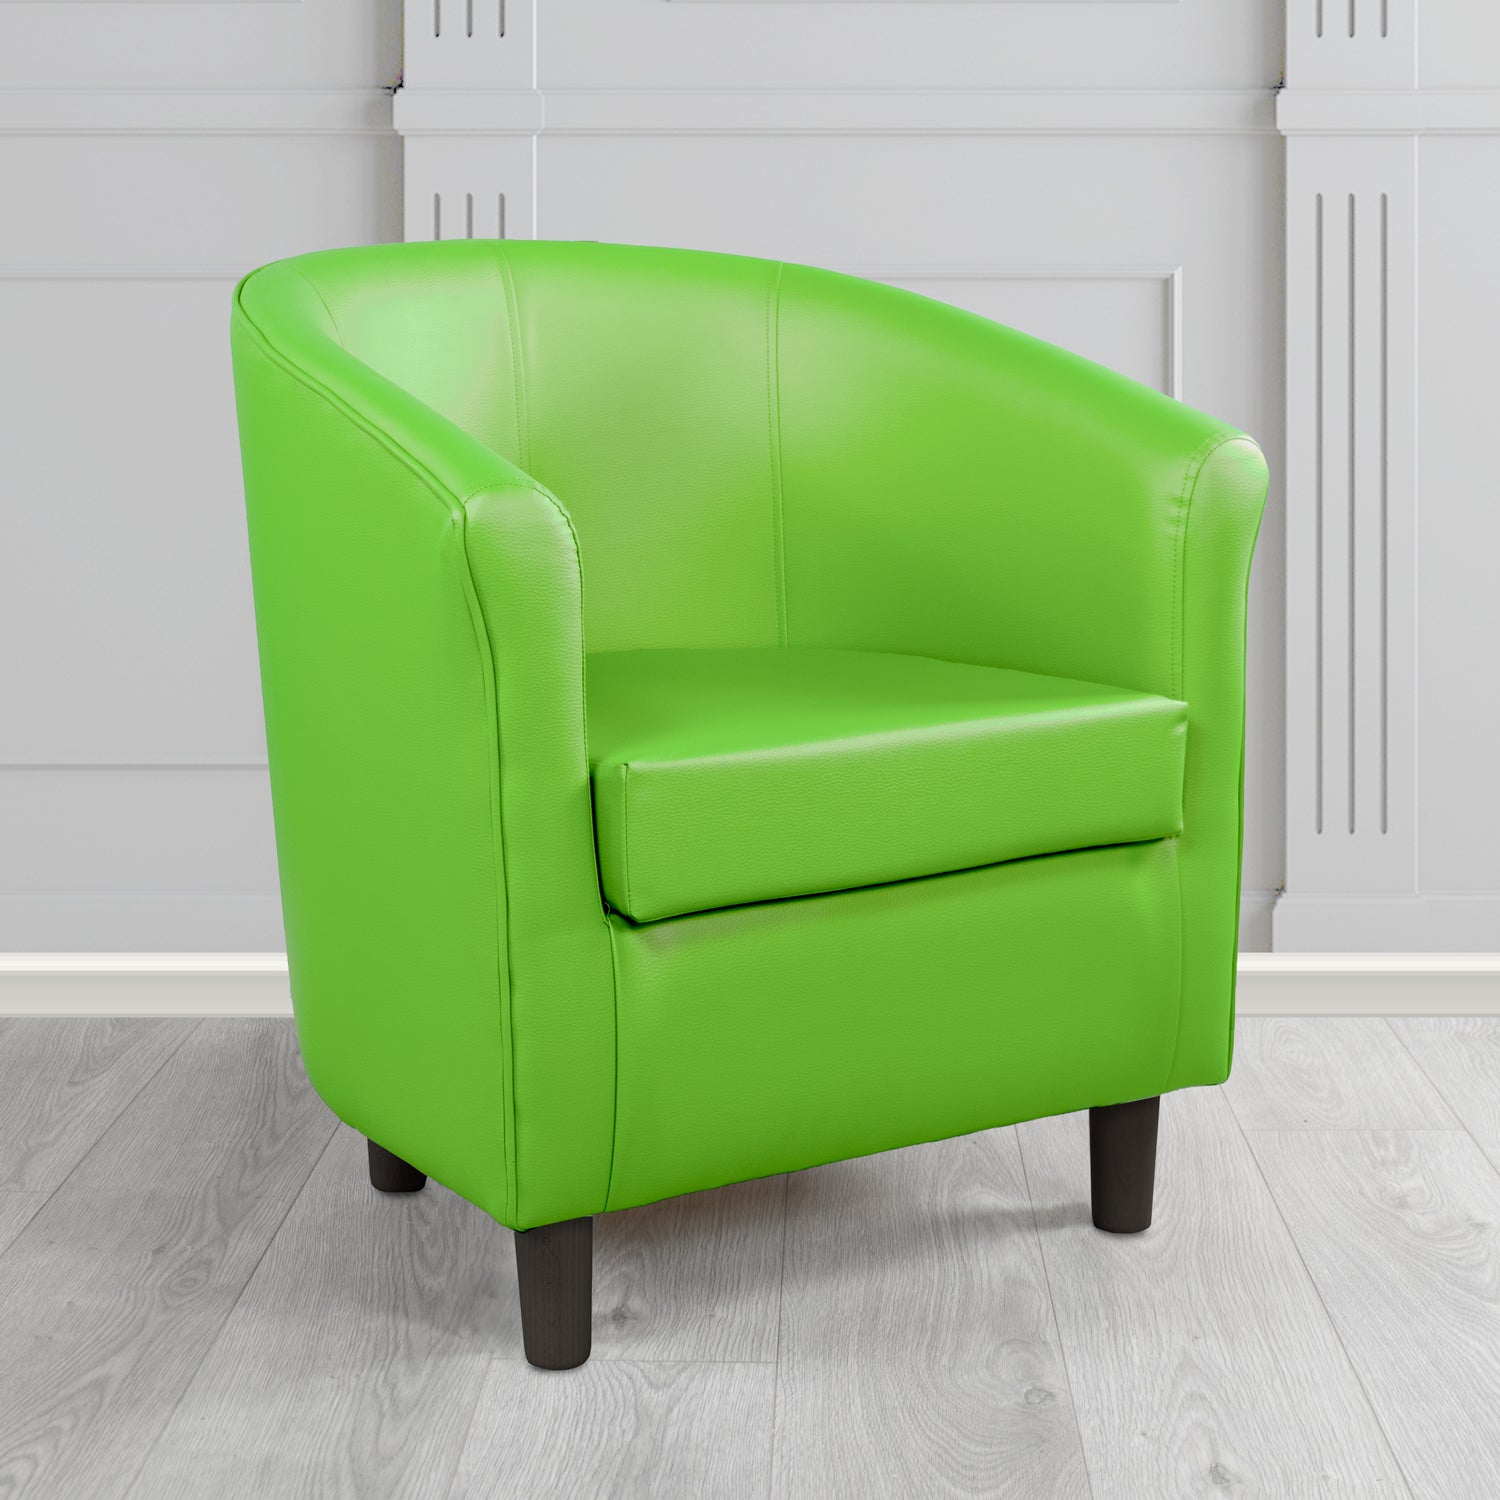 Tuscany Tub Chair in Madrid Lime Faux Leather - The Tub Chair Shop